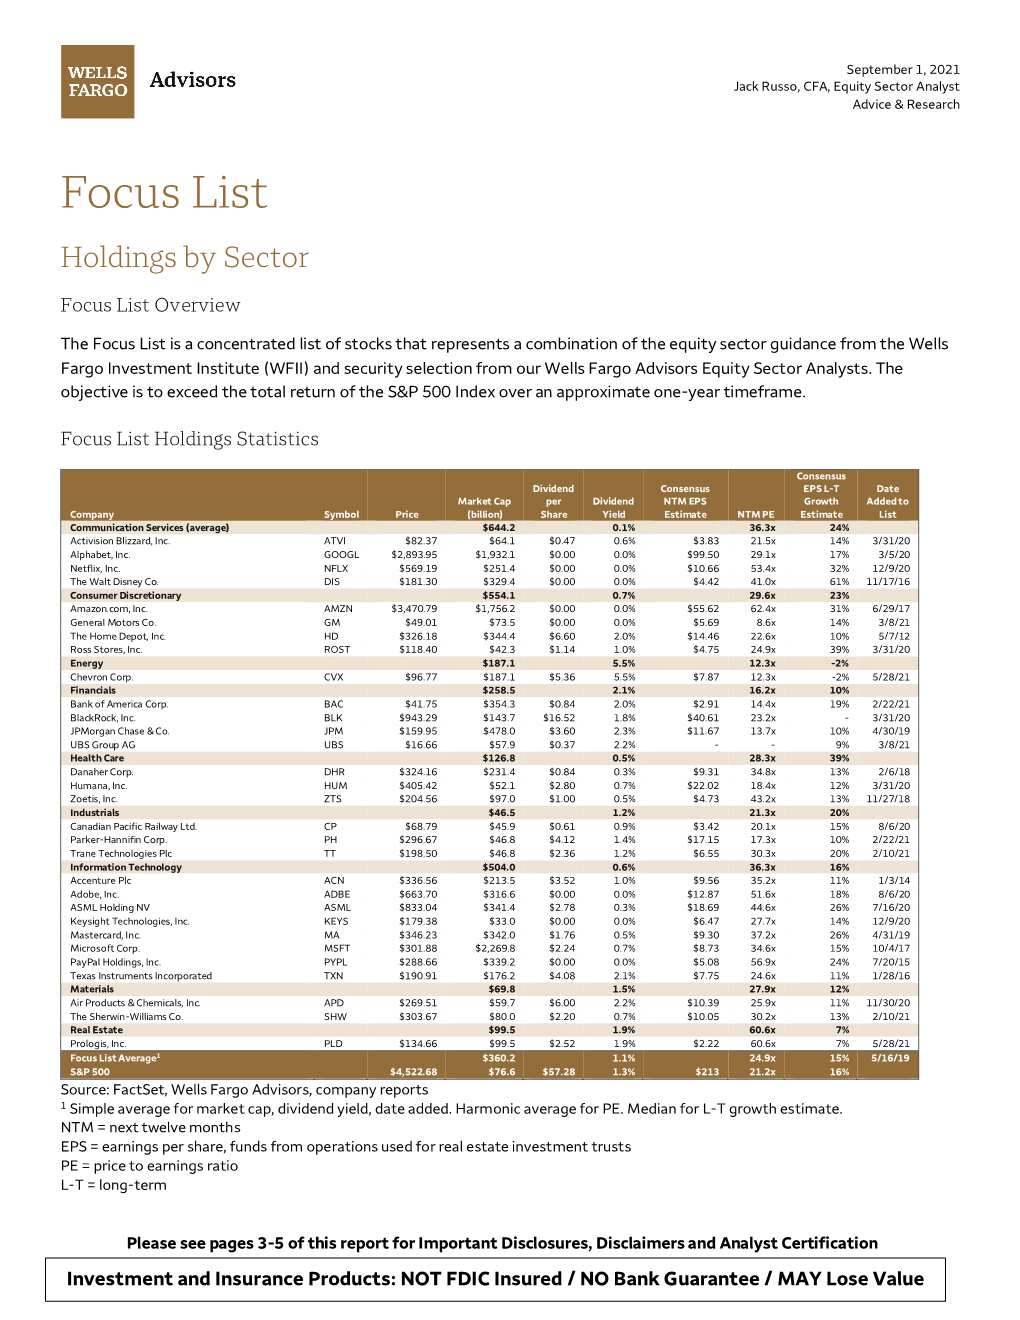 Focus List Holdings by Sector